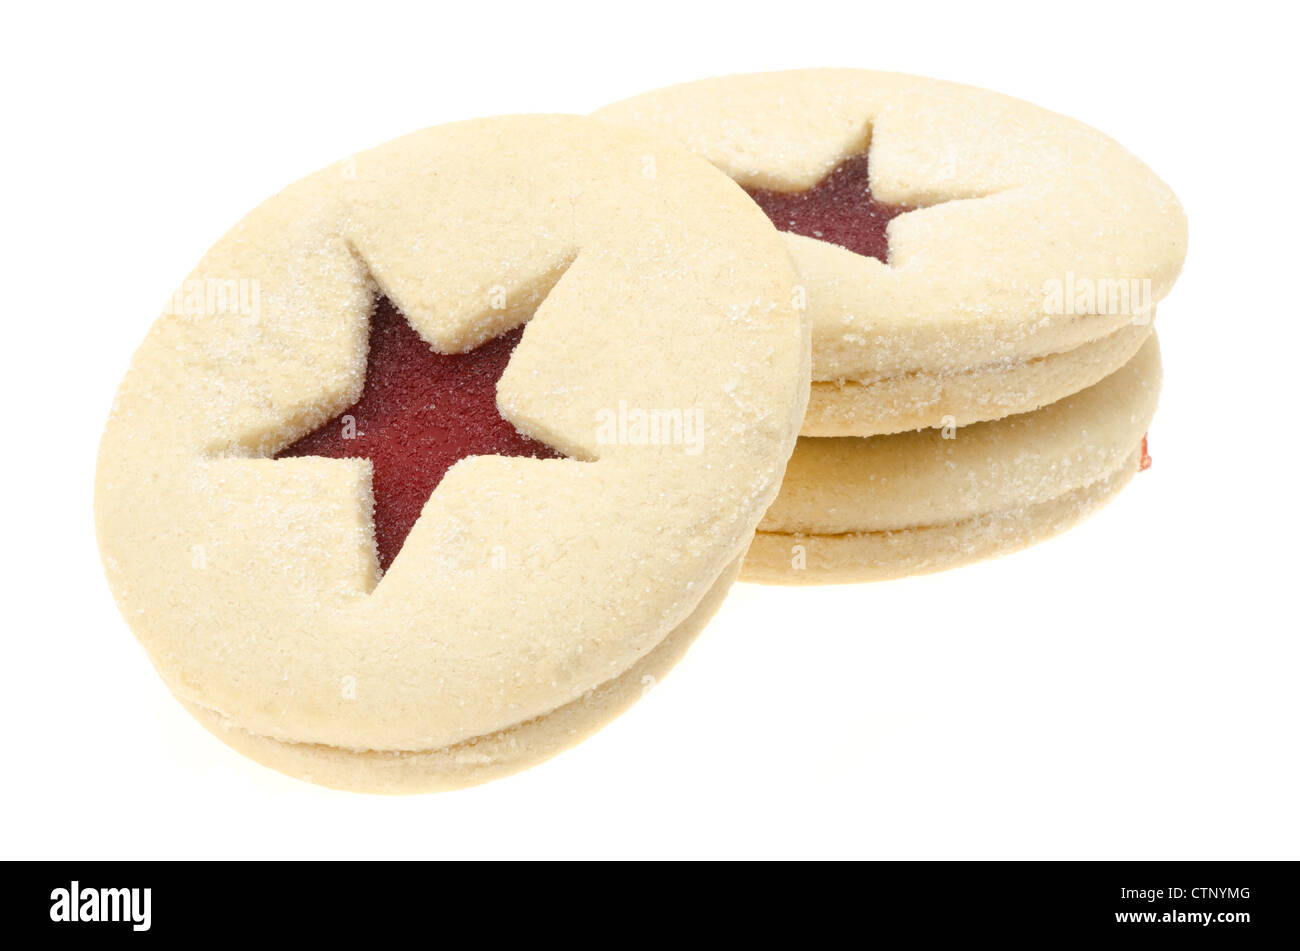 Three Linzer tarts with a jam centre, shallow depth of field - studio shot with a white background Stock Photo